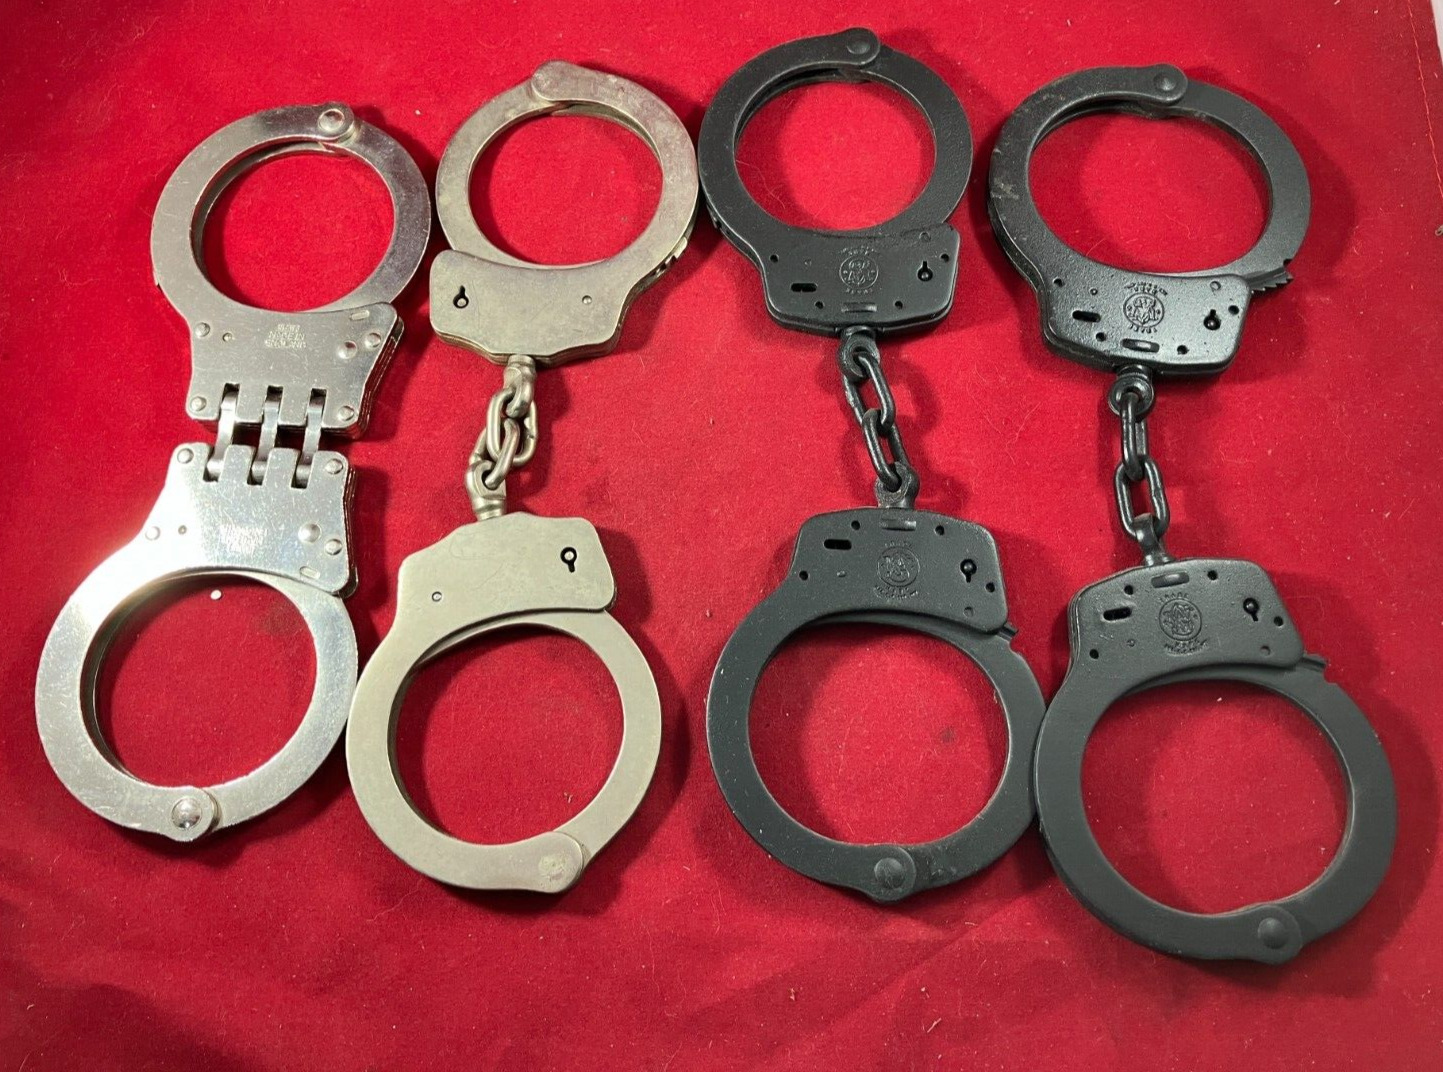 4 PAIRS VINTAGE HAND CUFFS HIATTS S&W Smith & Wesson Made in USA and ENGLAND